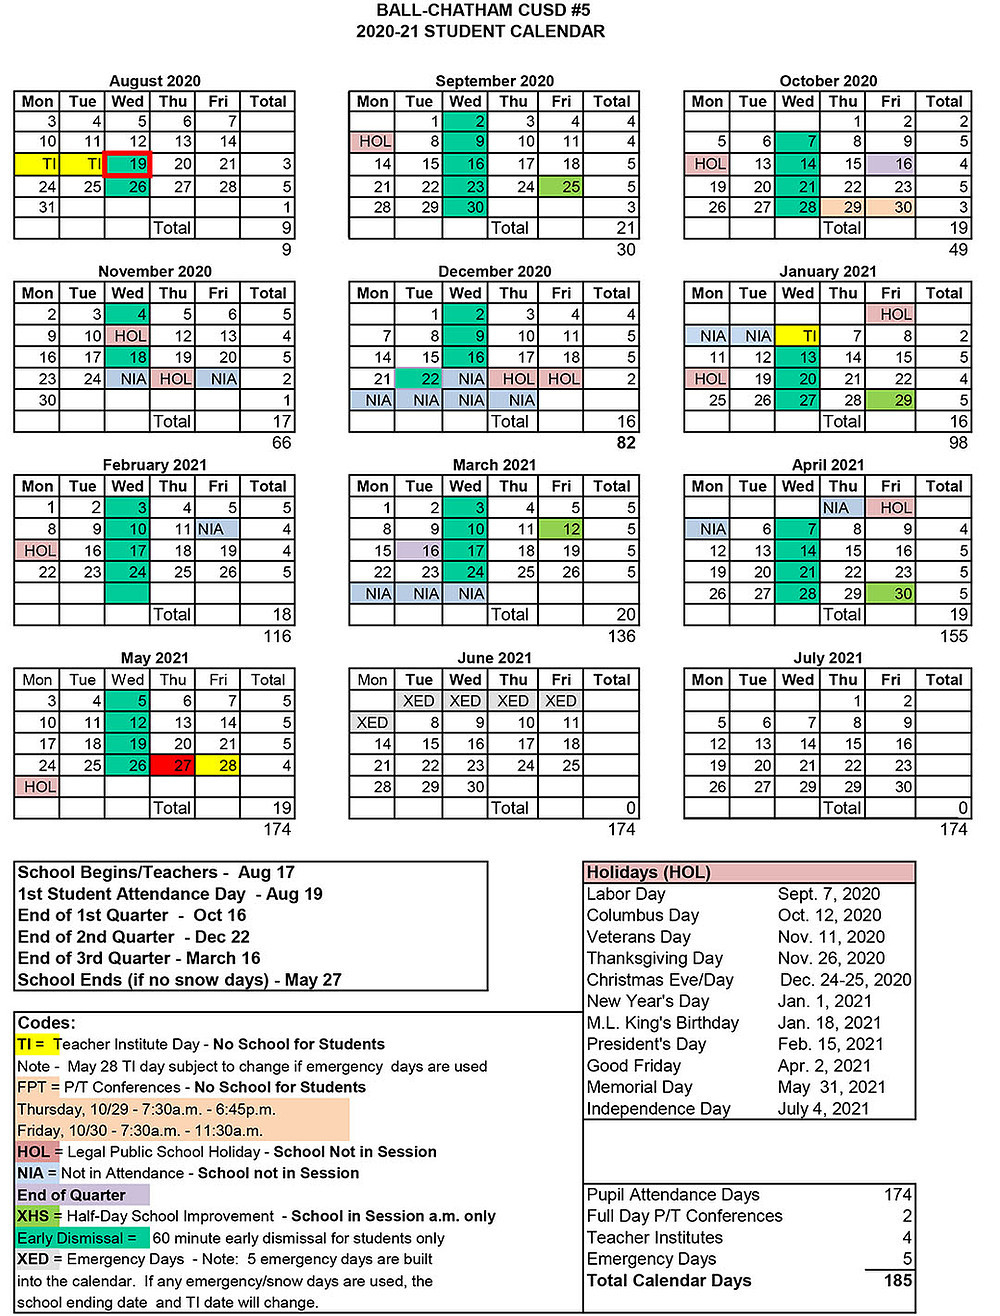 Board Of Education Approves Student Attendance Calendars-2021 Attendance Calendar Wa And Or